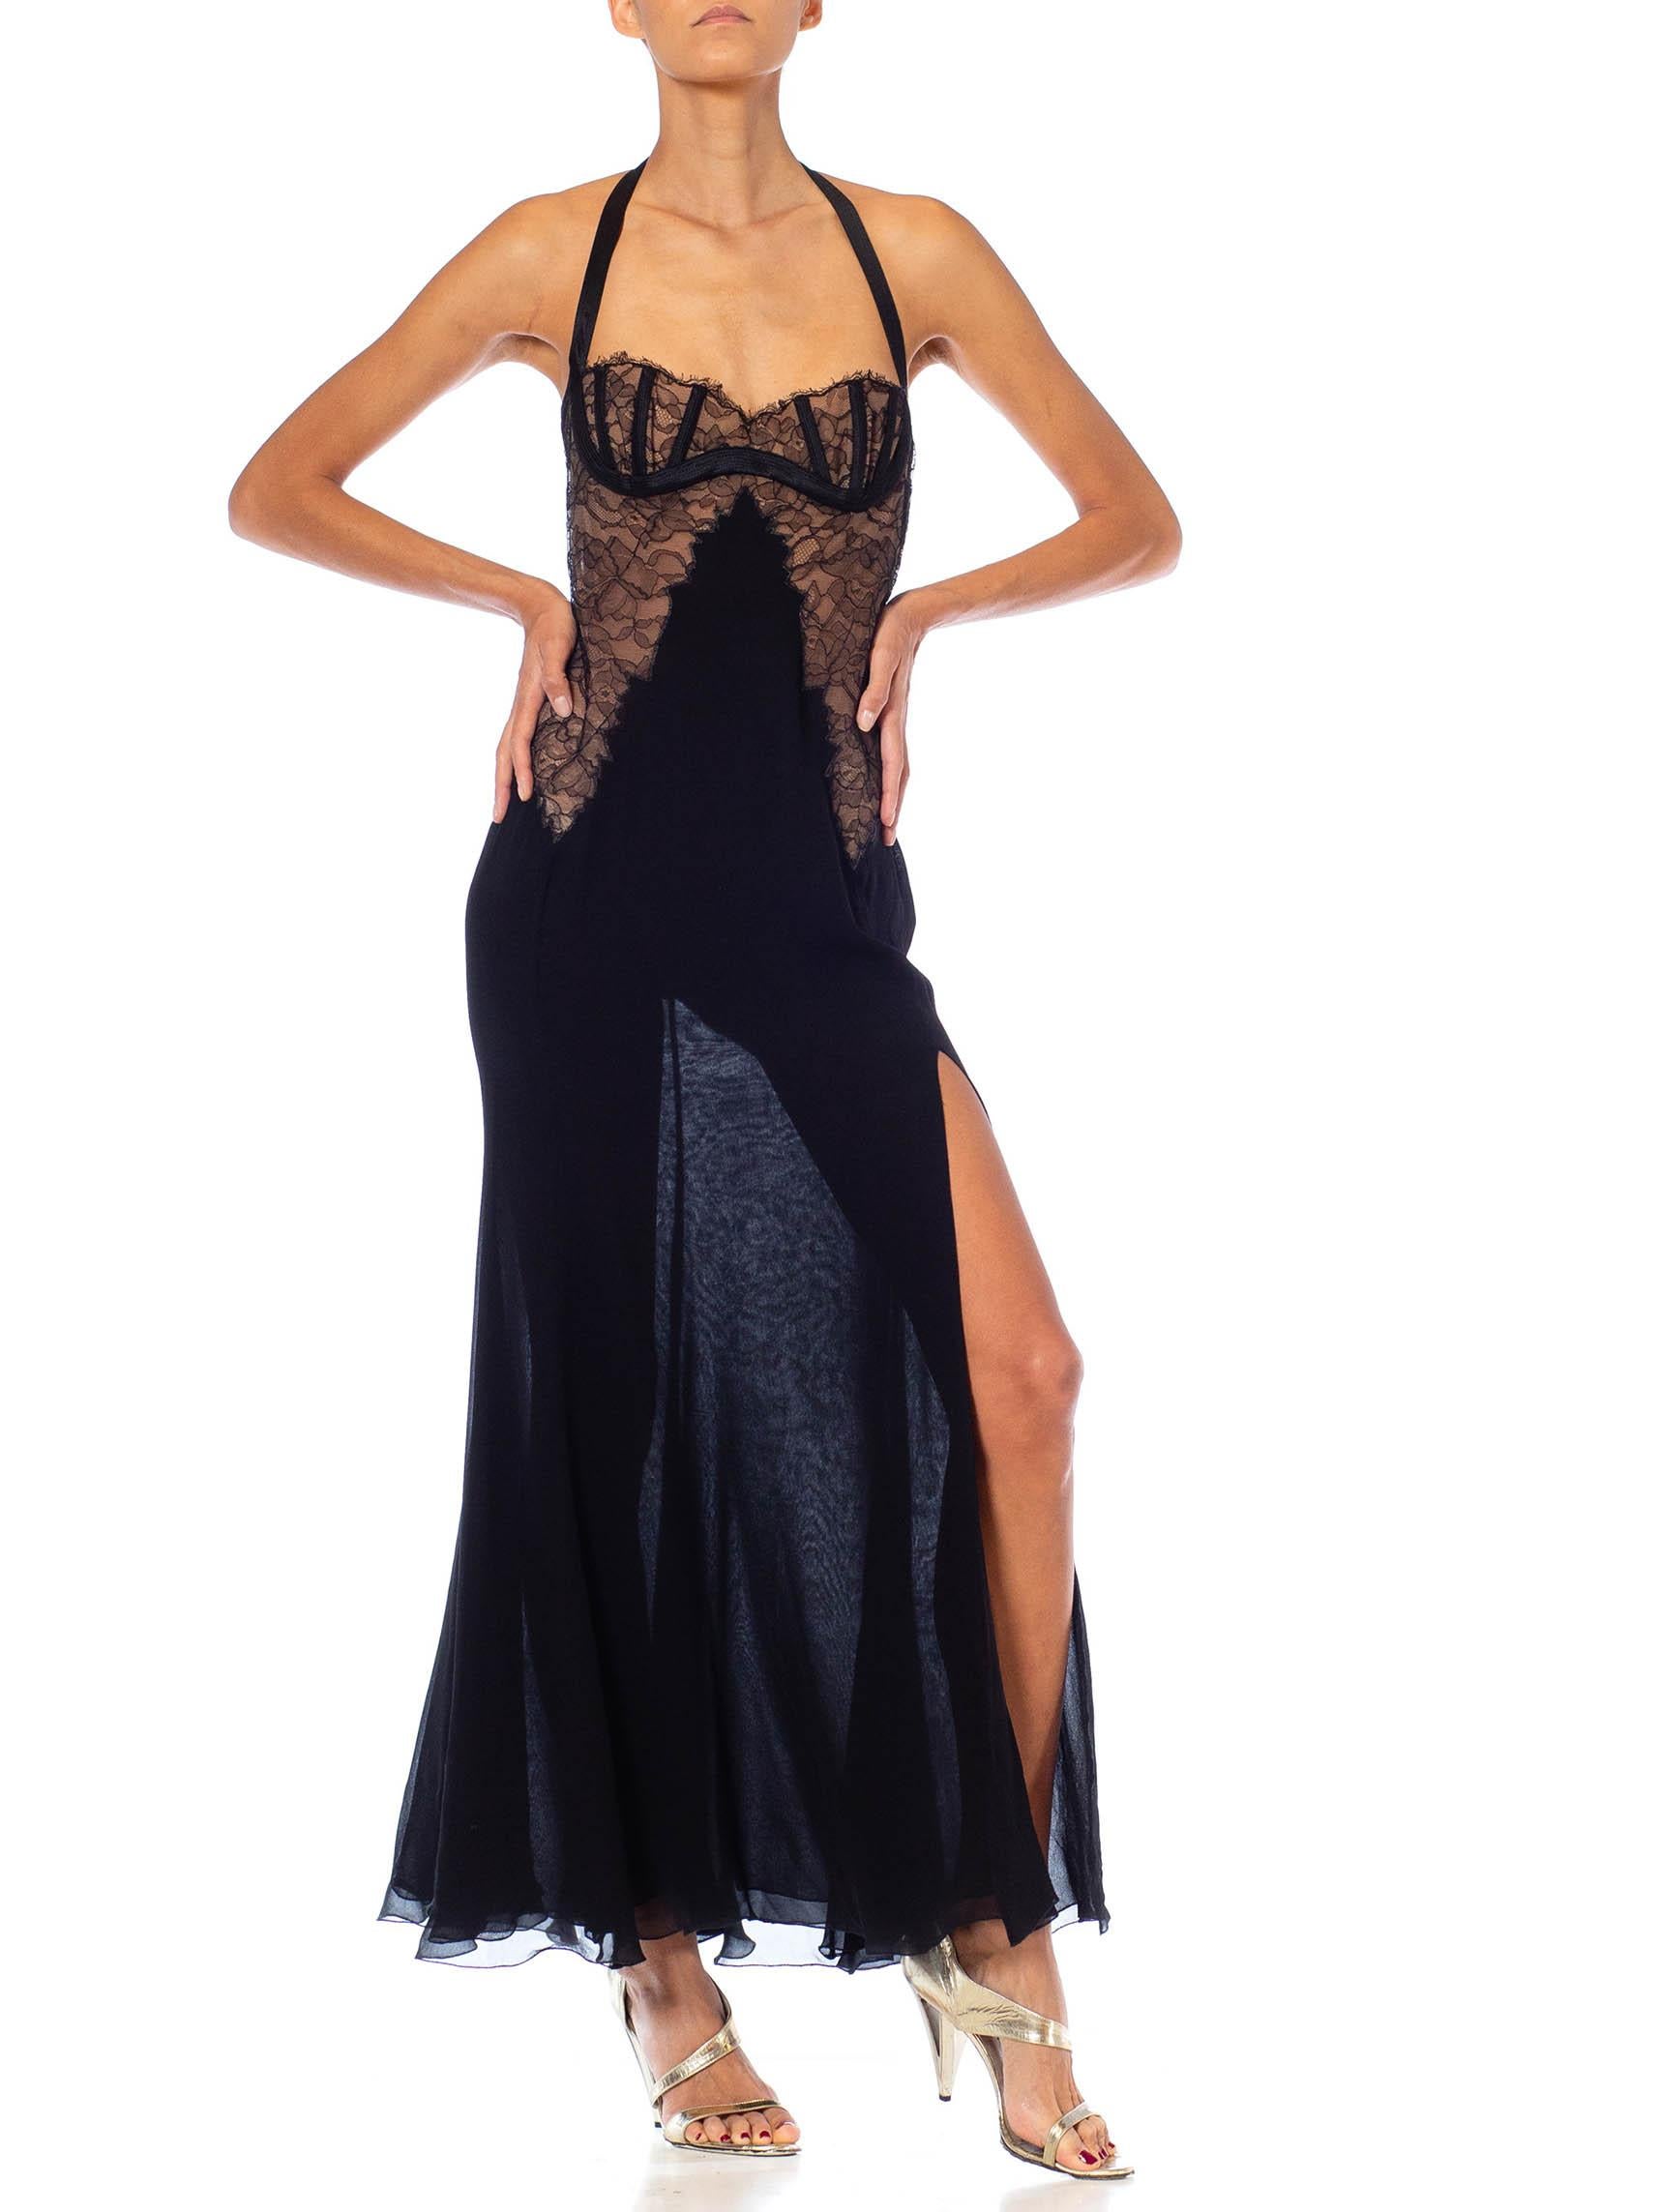 1990S Gianni Versace Black Silk Chiffon & Lace Lingerie Gown With High Slit 1